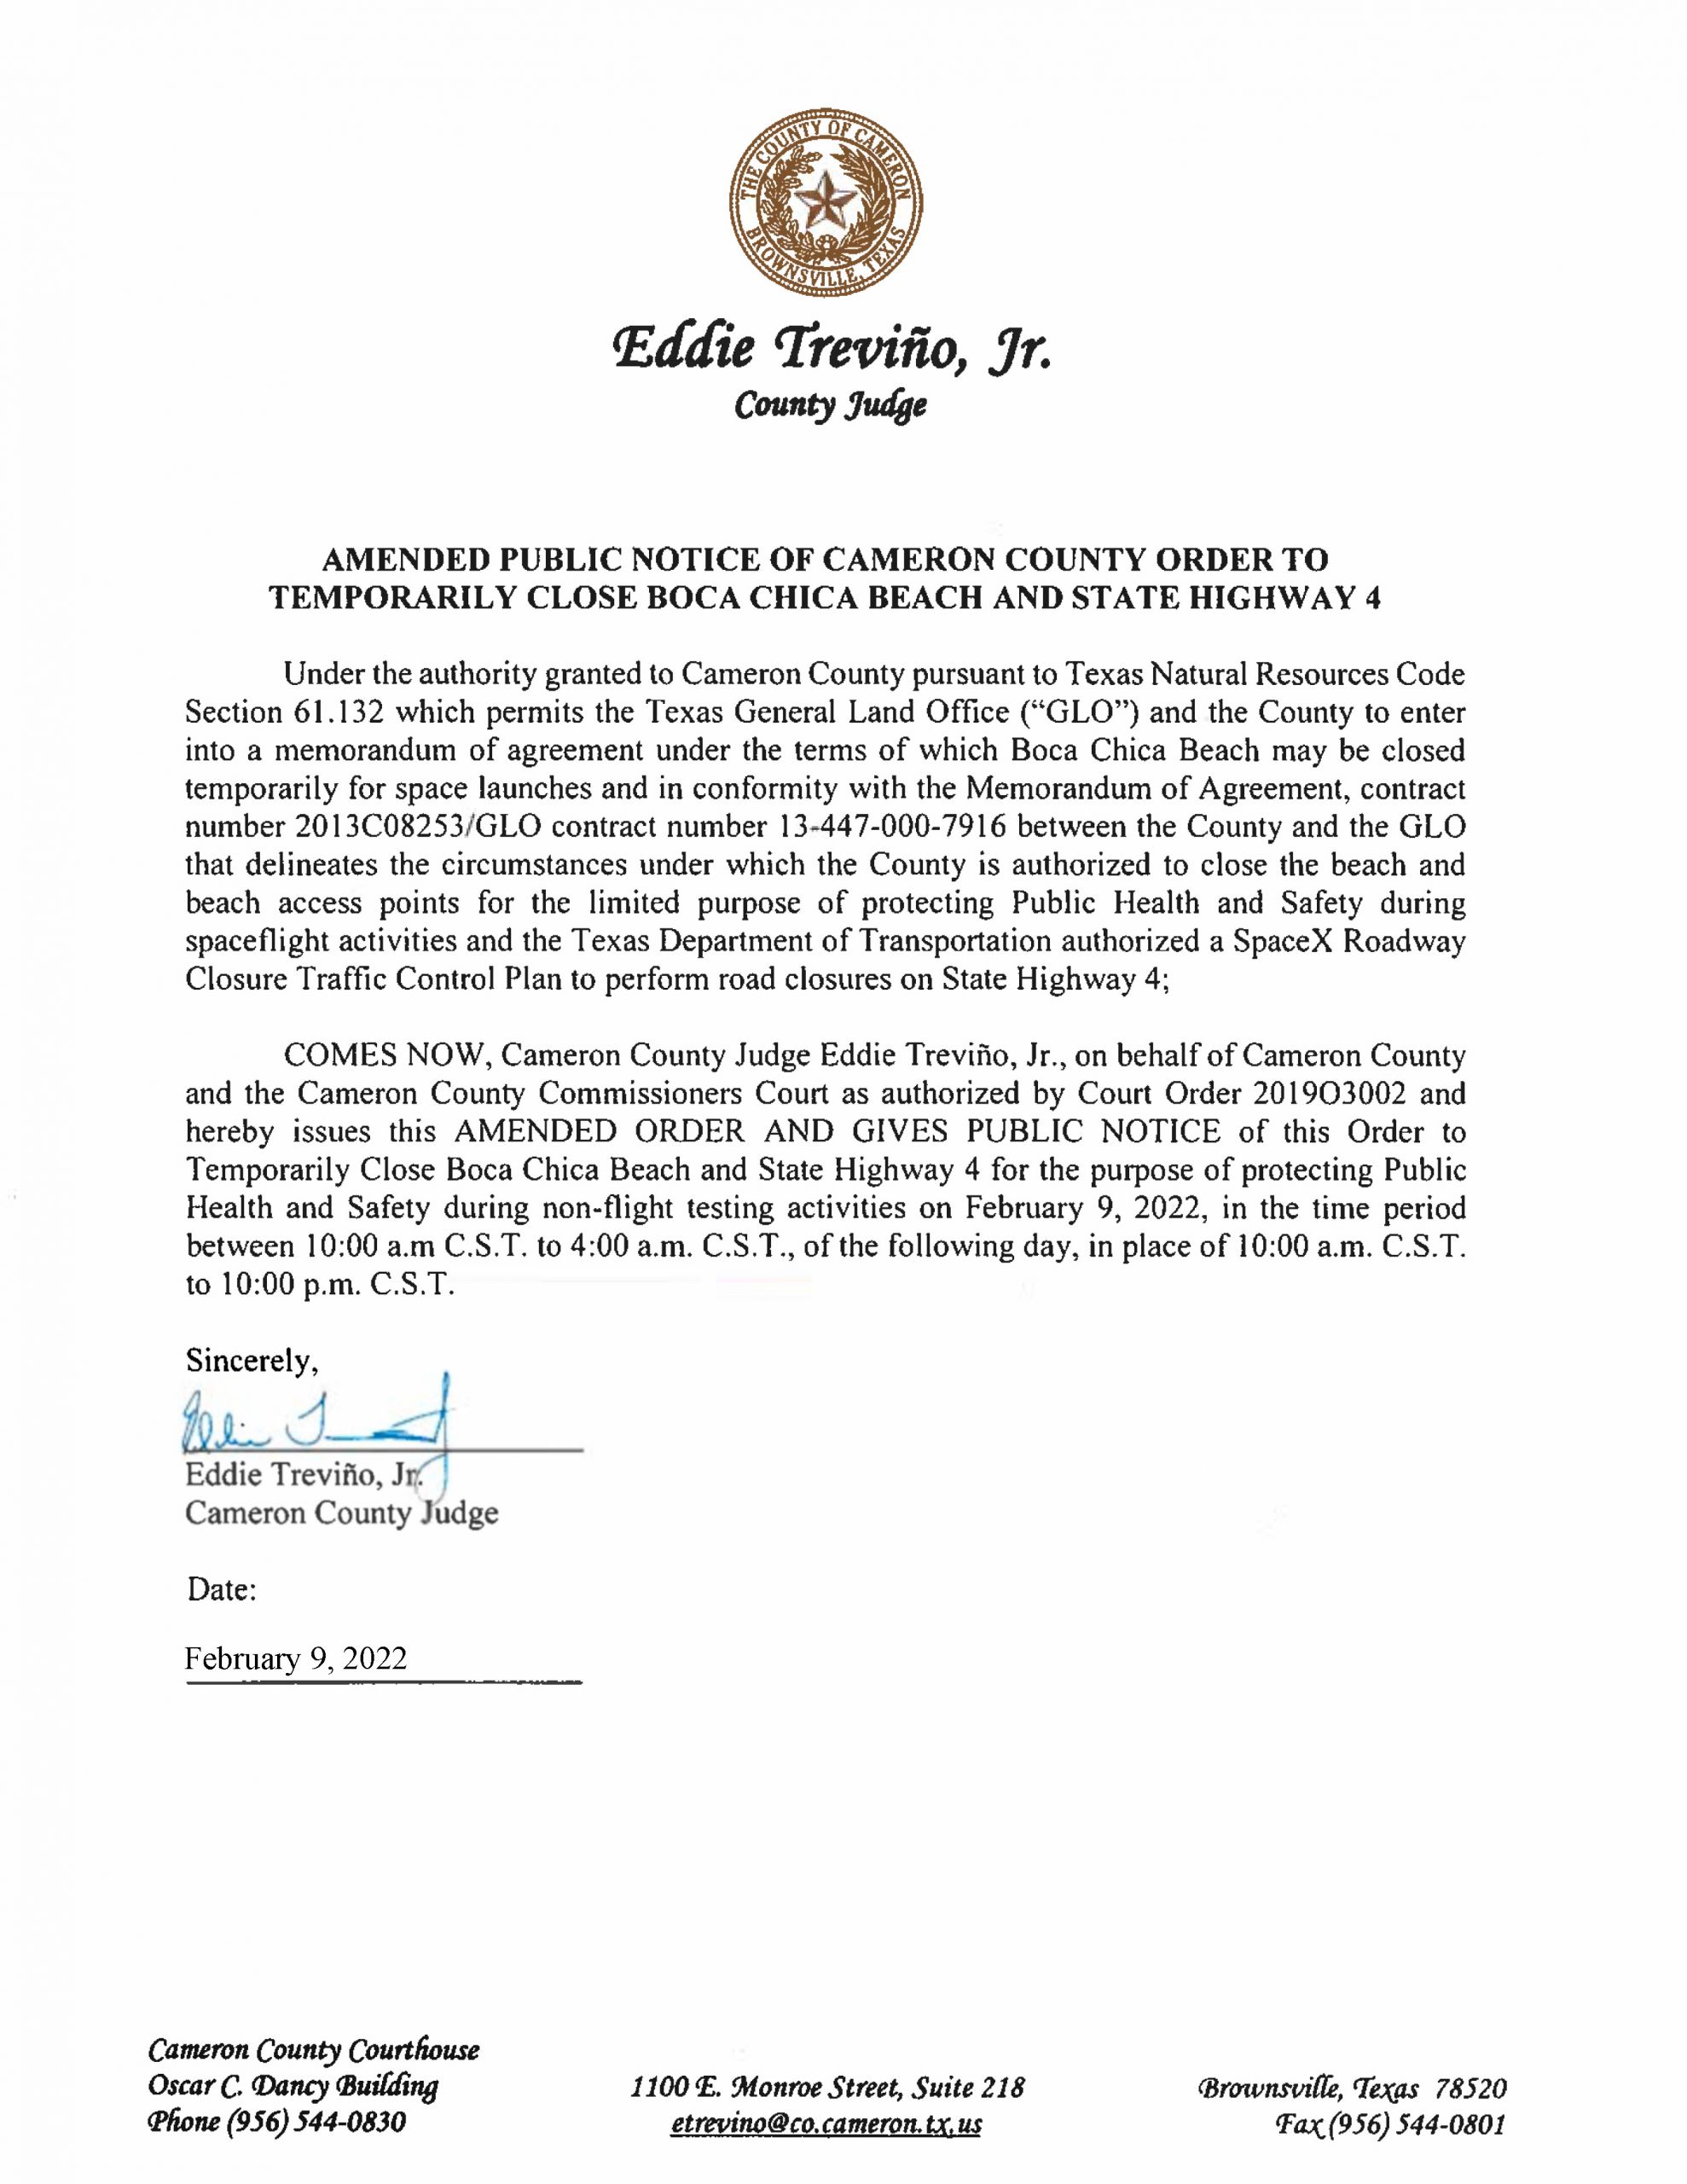 AMENDMENT PUBLIC NOTICE OF CAMERON COUNTY ORDER TO TEMP. BEACH CLOSURE AND HWY.02.09.2022 Scaled